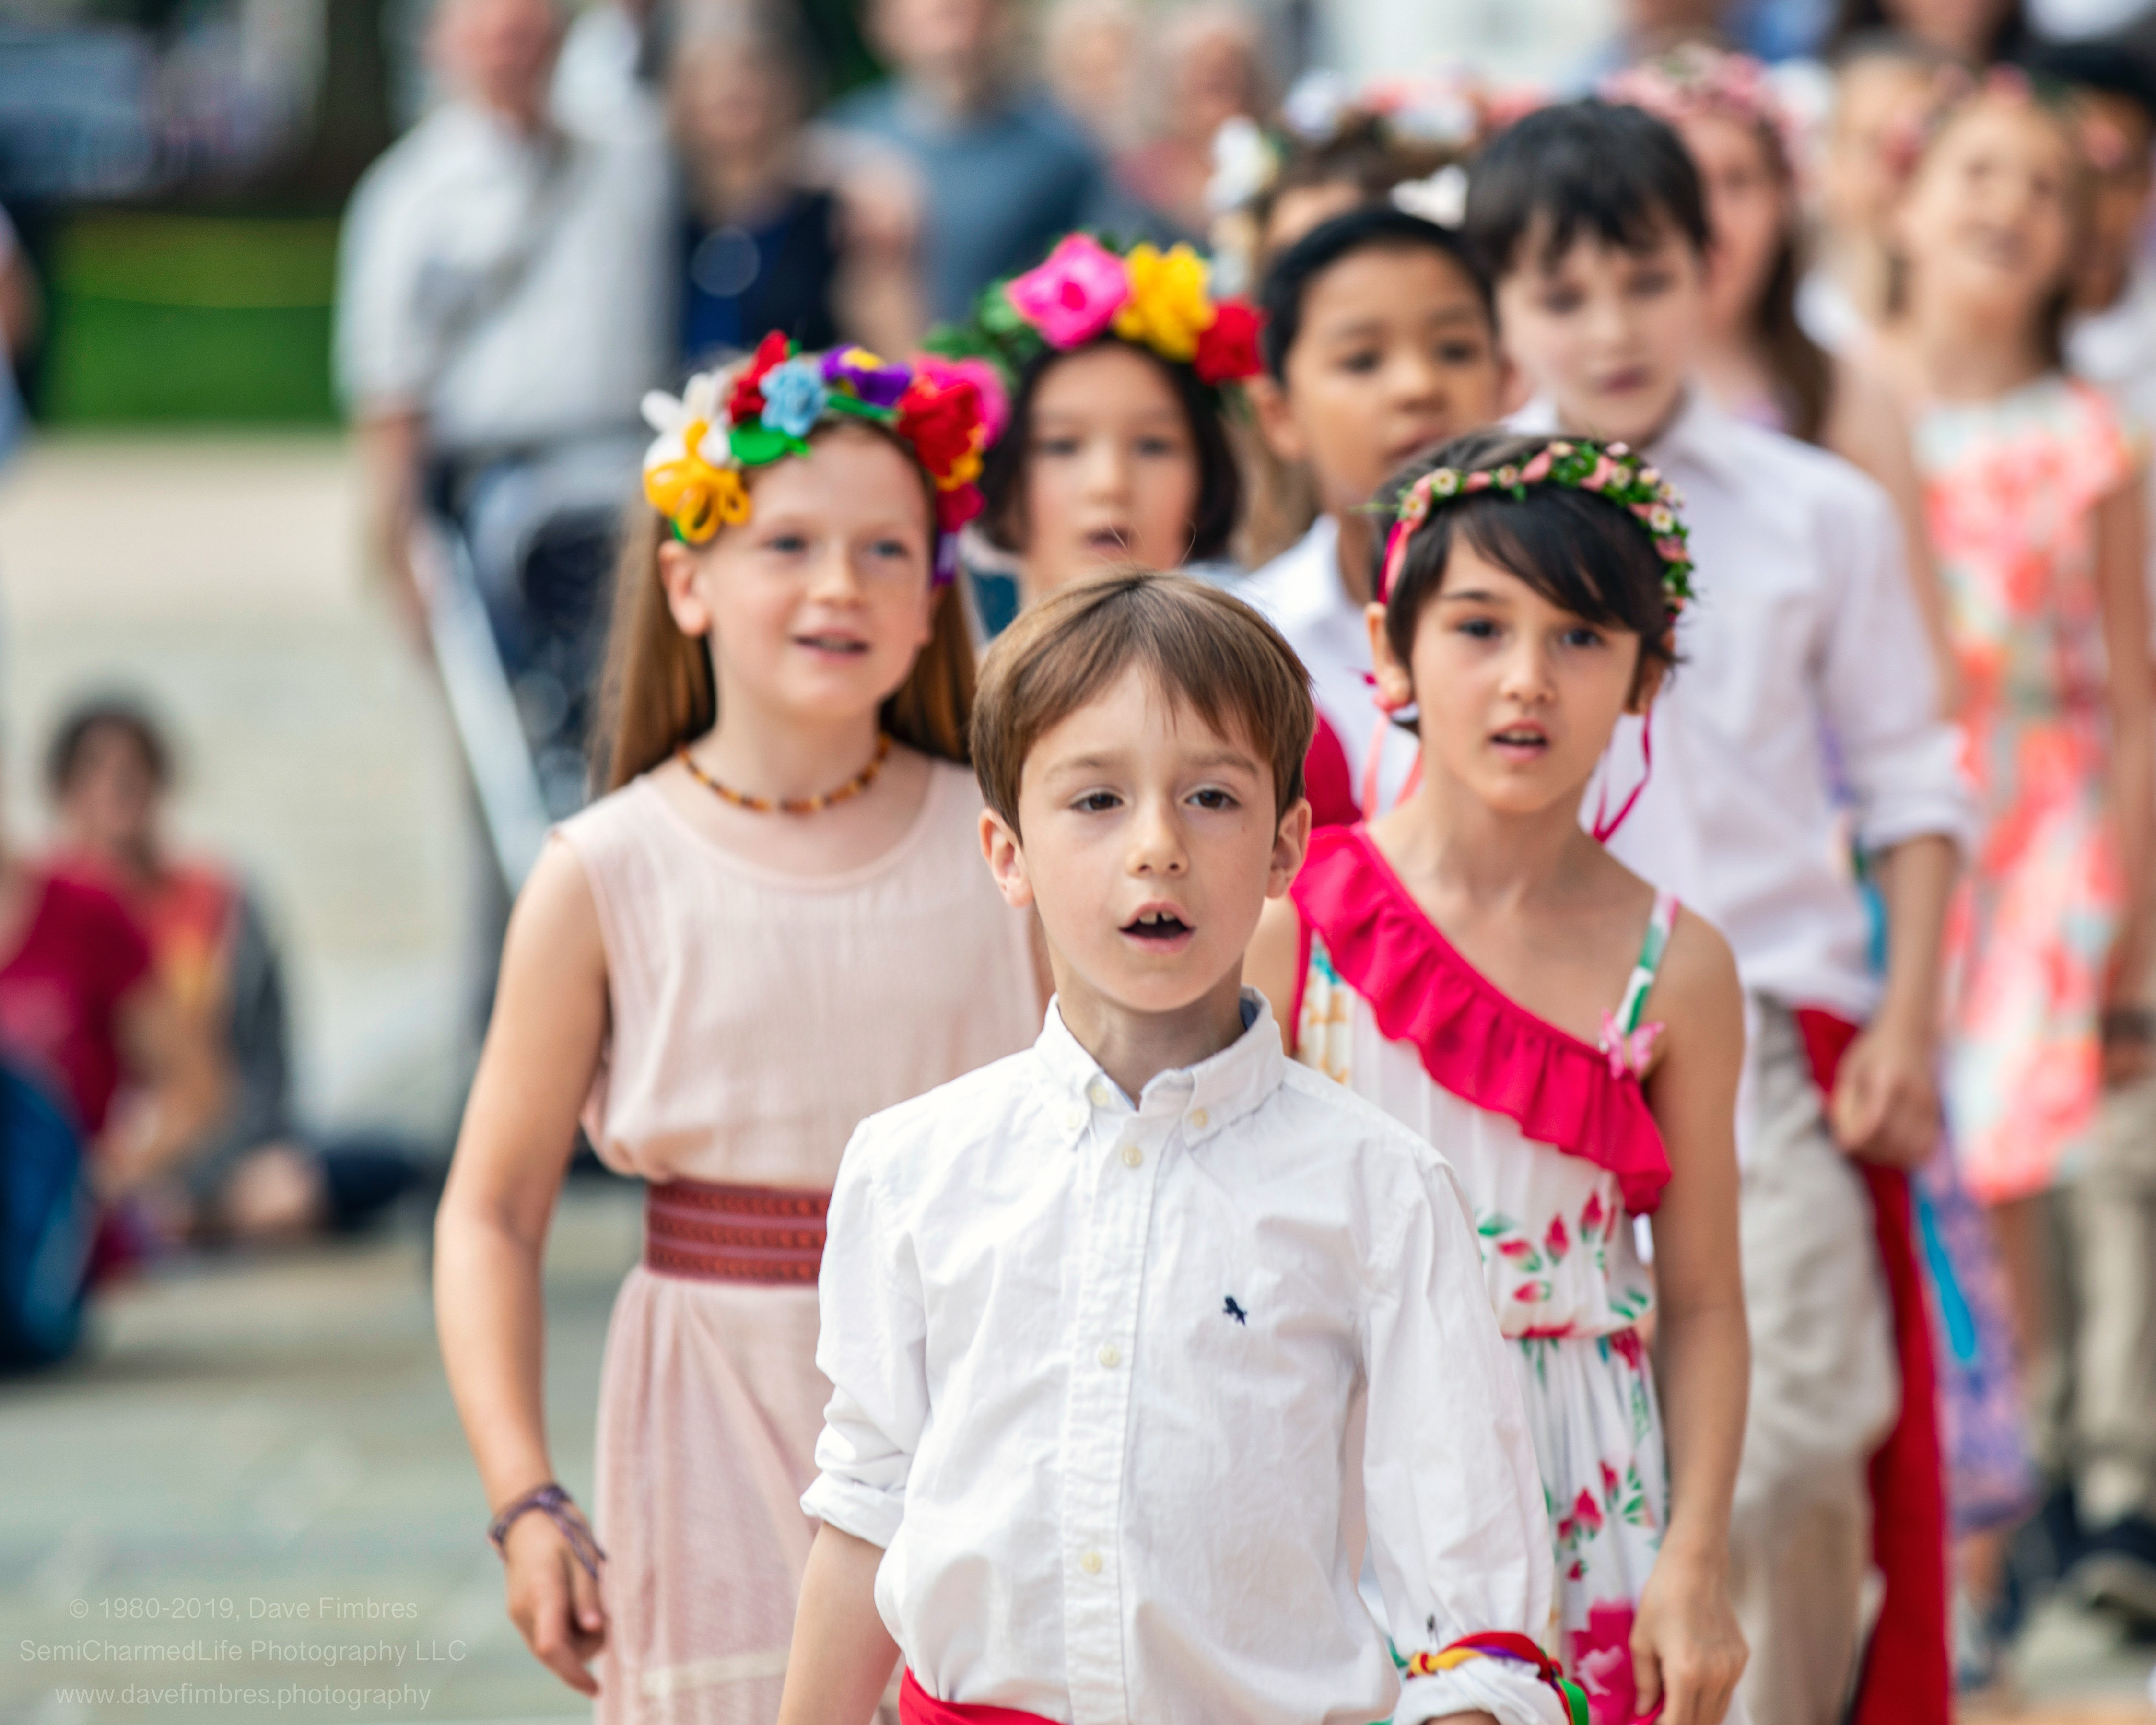 Kieran Lewis in the Children's Chorus of the 2019 May Revels at Washington National Cathedral.